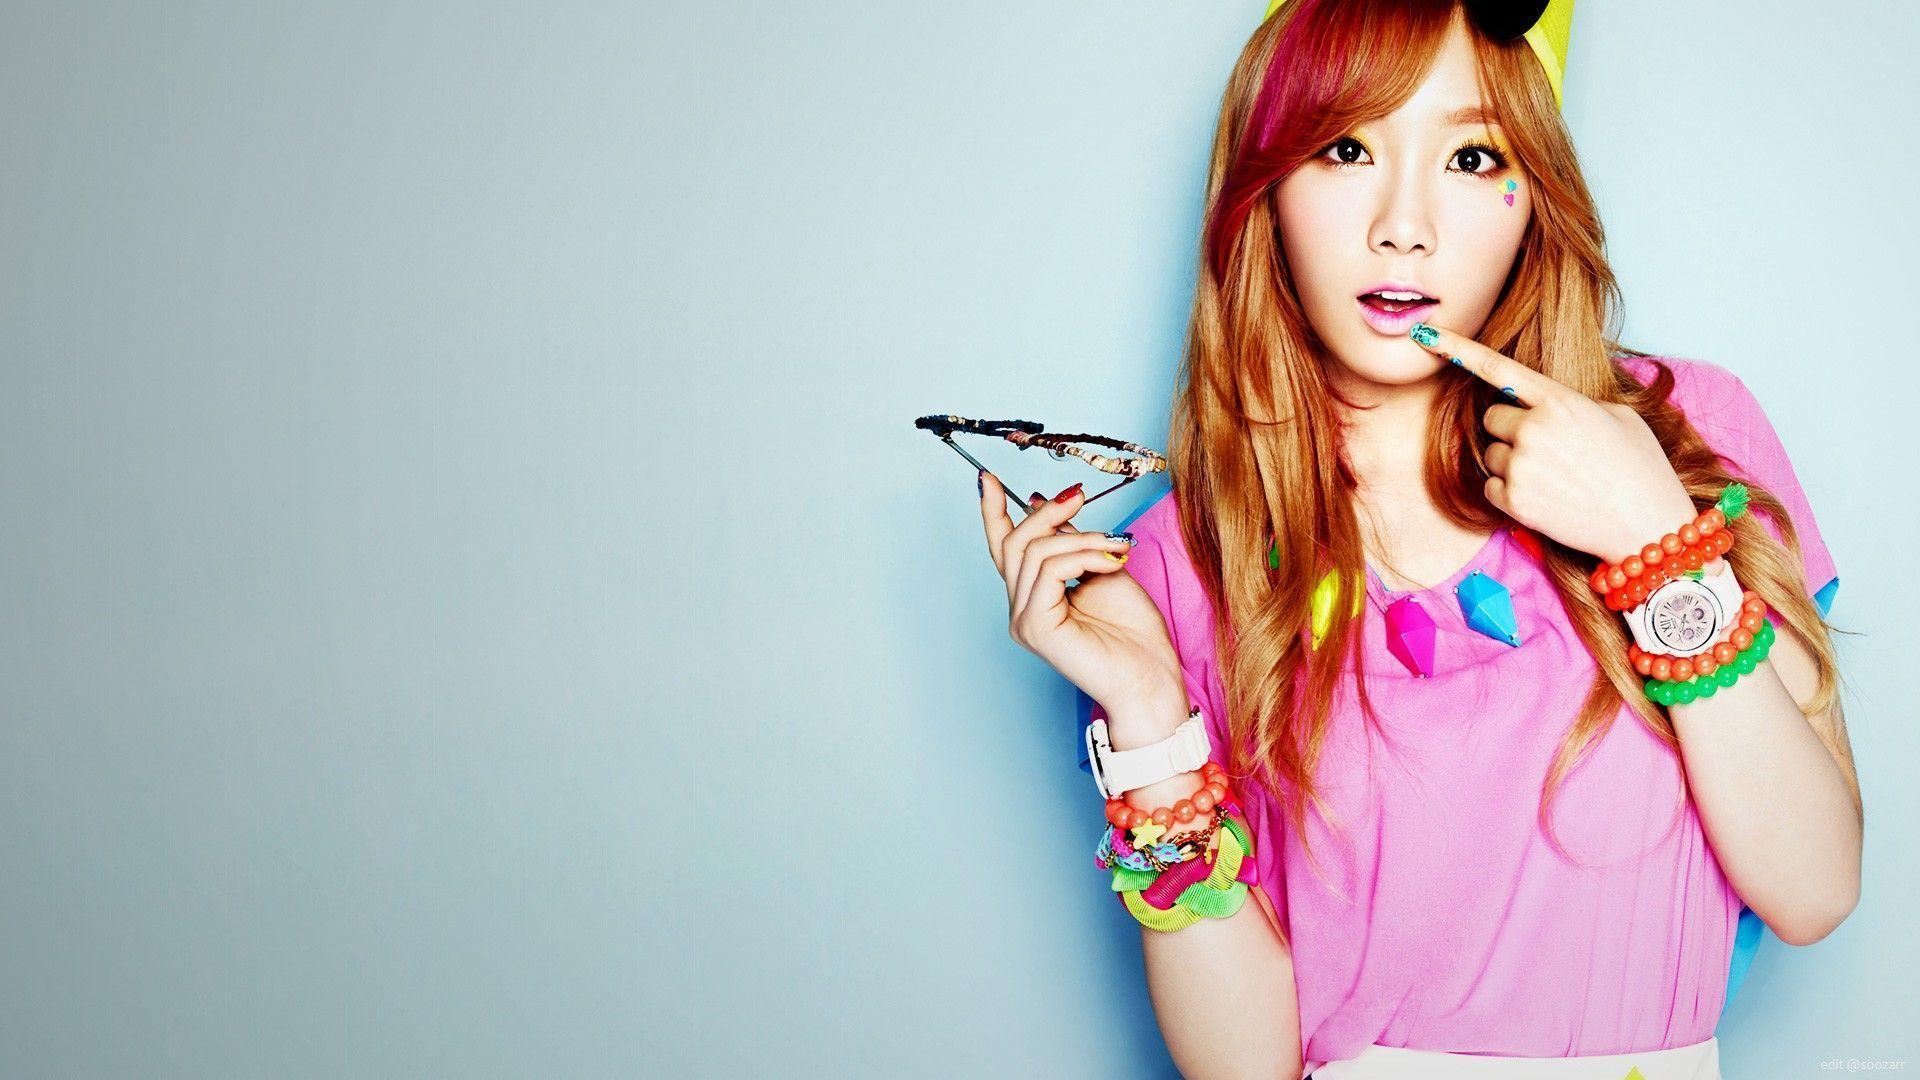 taeyeon baby wallpaper - Image And Wallpaper free to